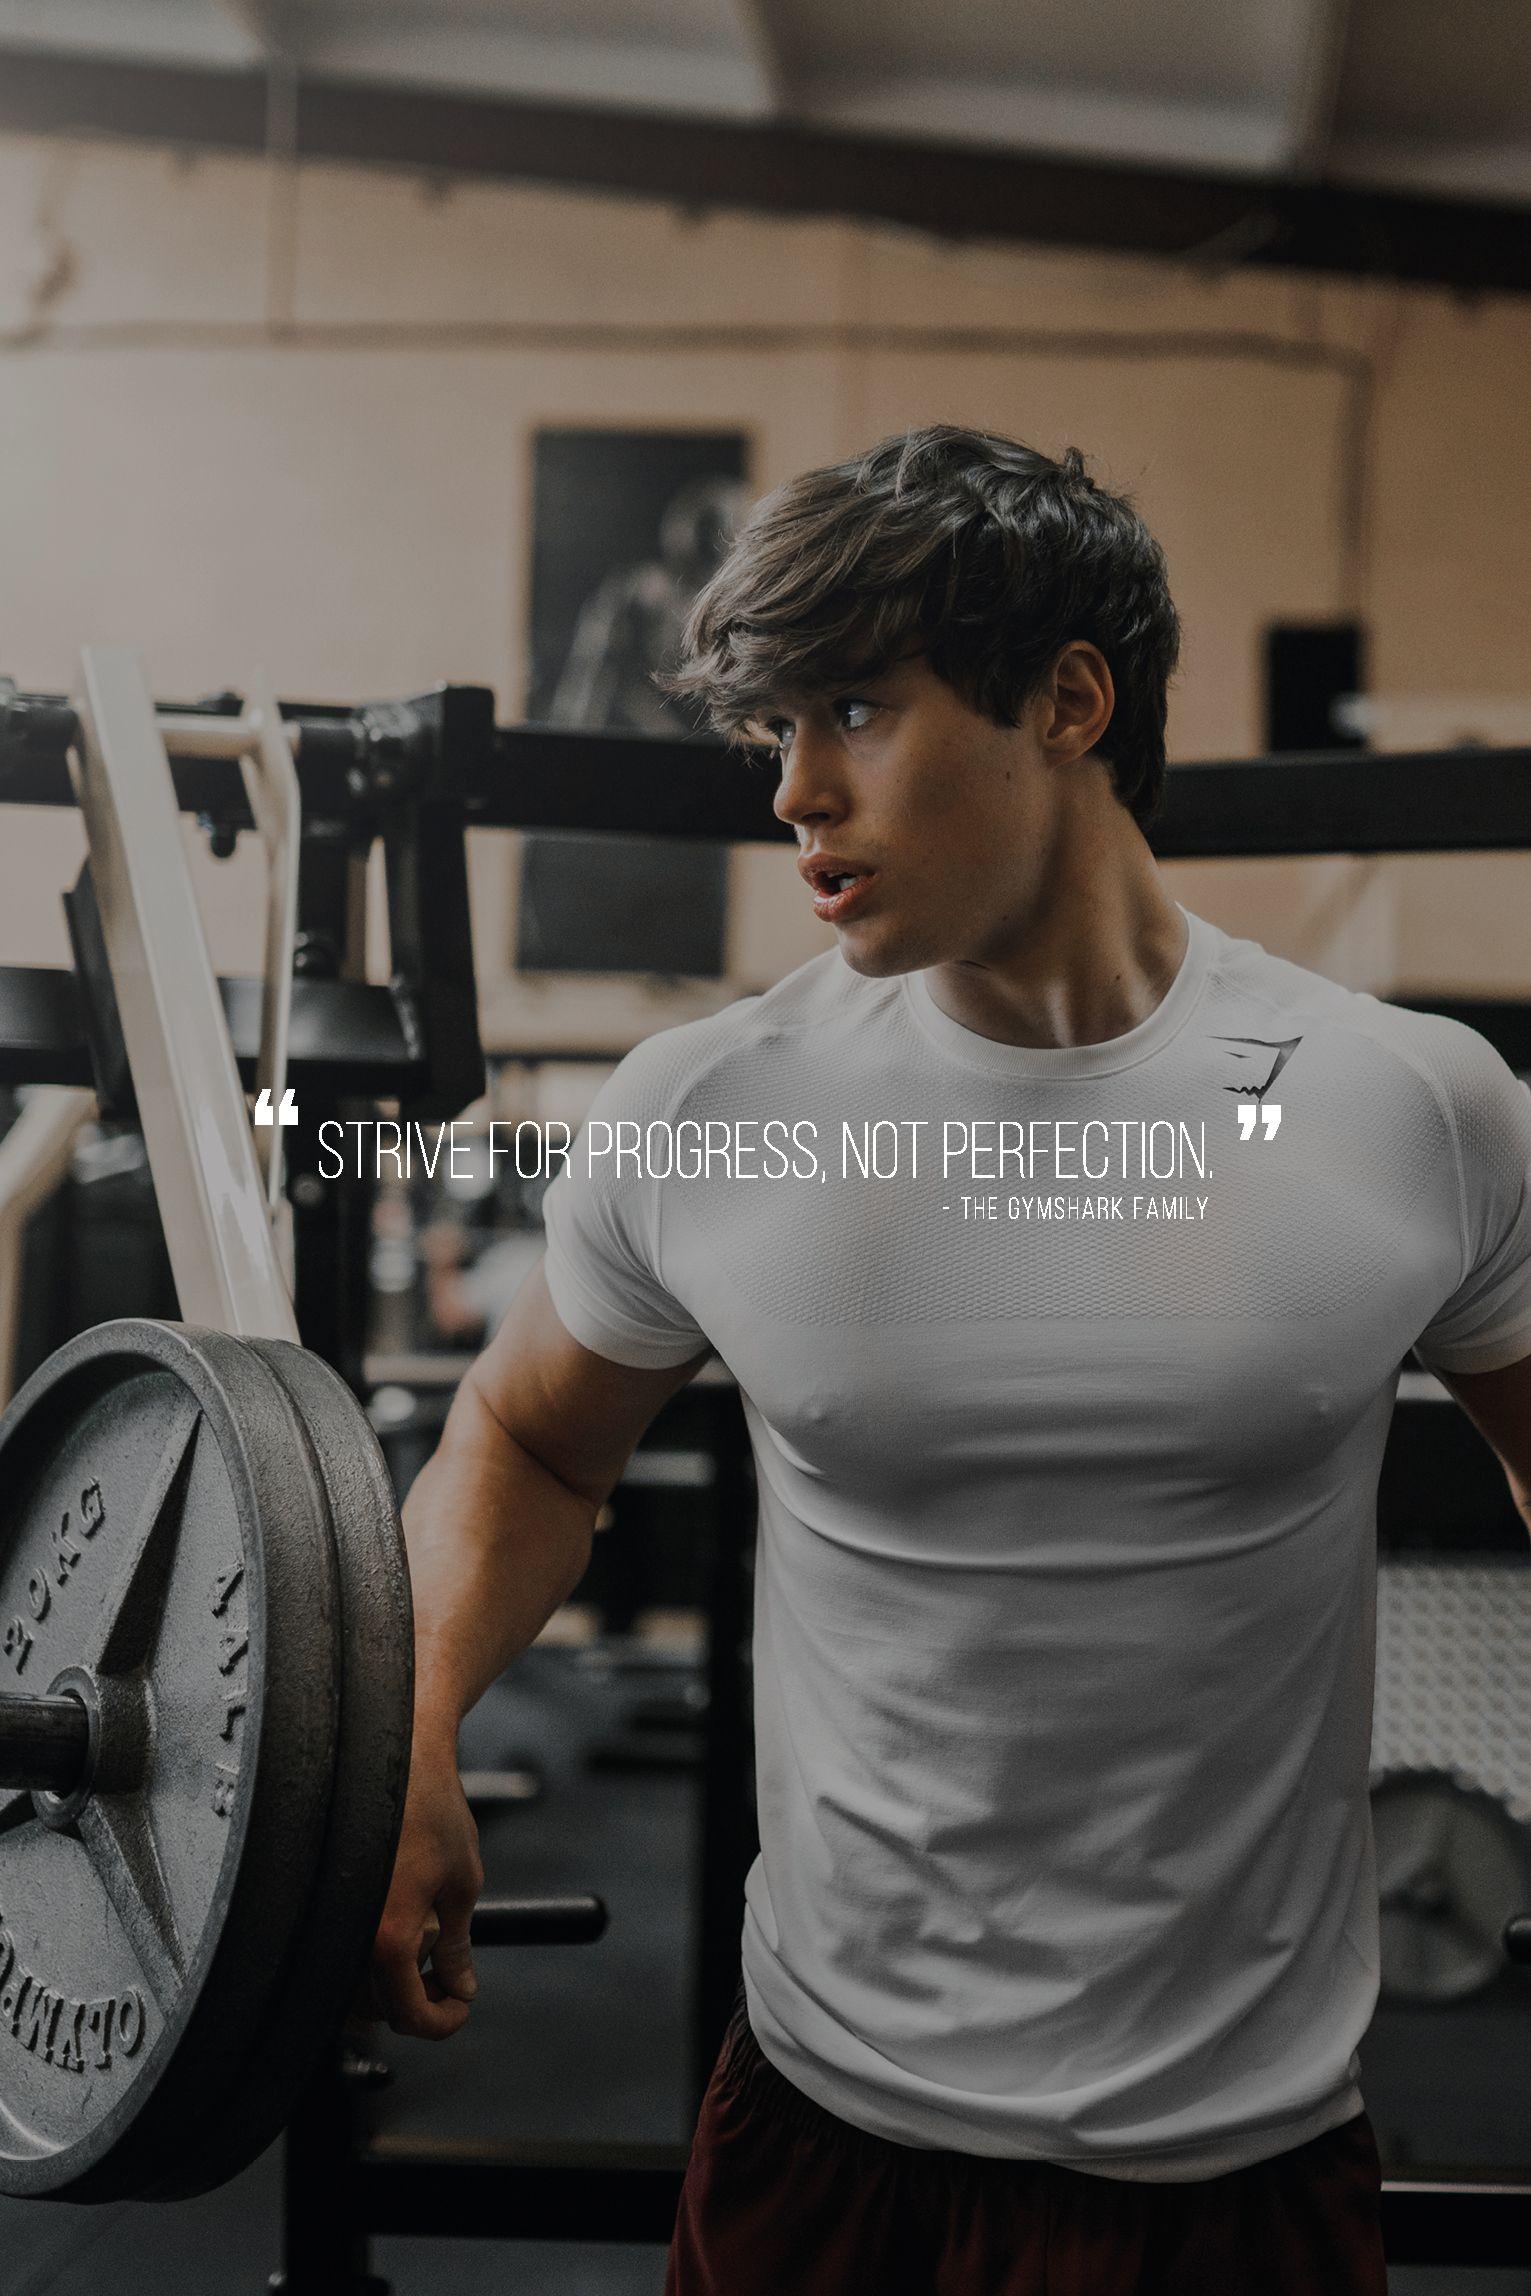 Strive for progress, not perfection quote